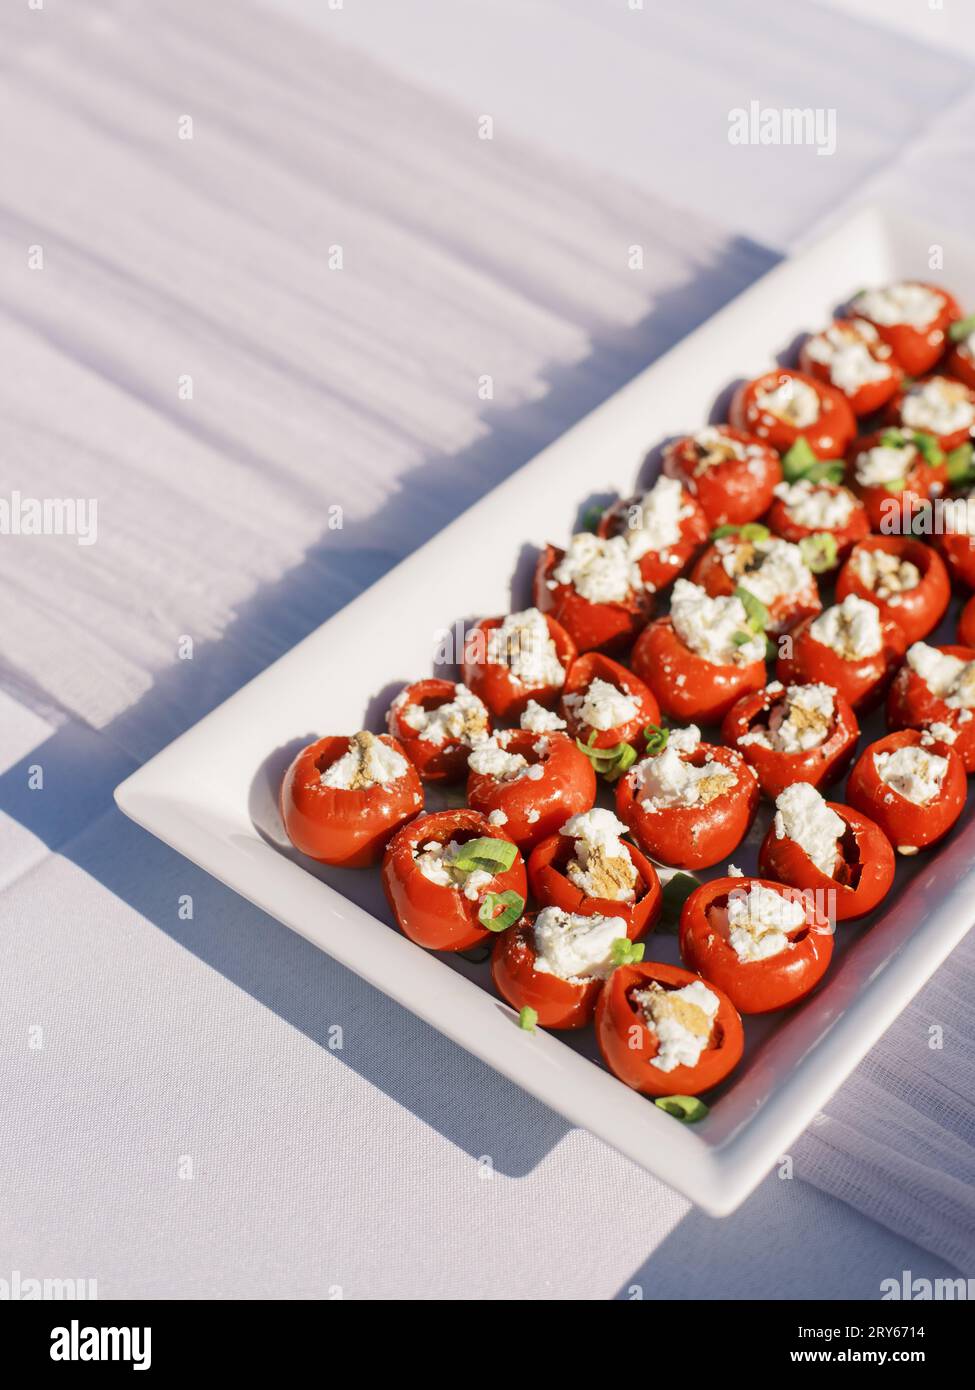 Tray of cheese-stuffed tomatoes, catered food Stock Photo